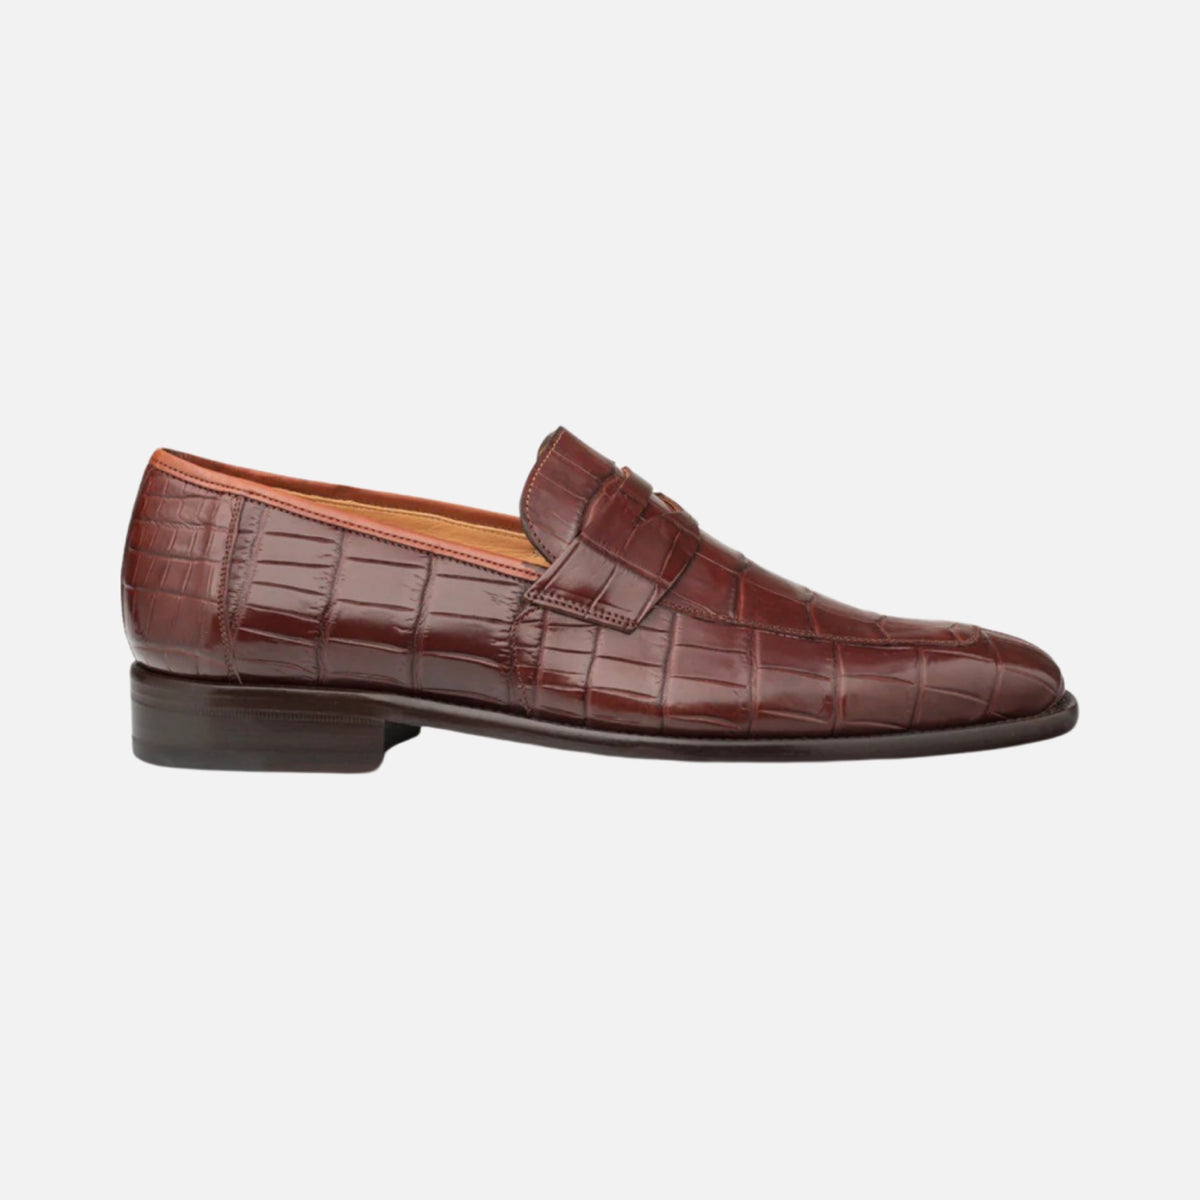 Mezlan Piccolo 'Sport' Alligator Penny Loafer - Handcrafted in Spain